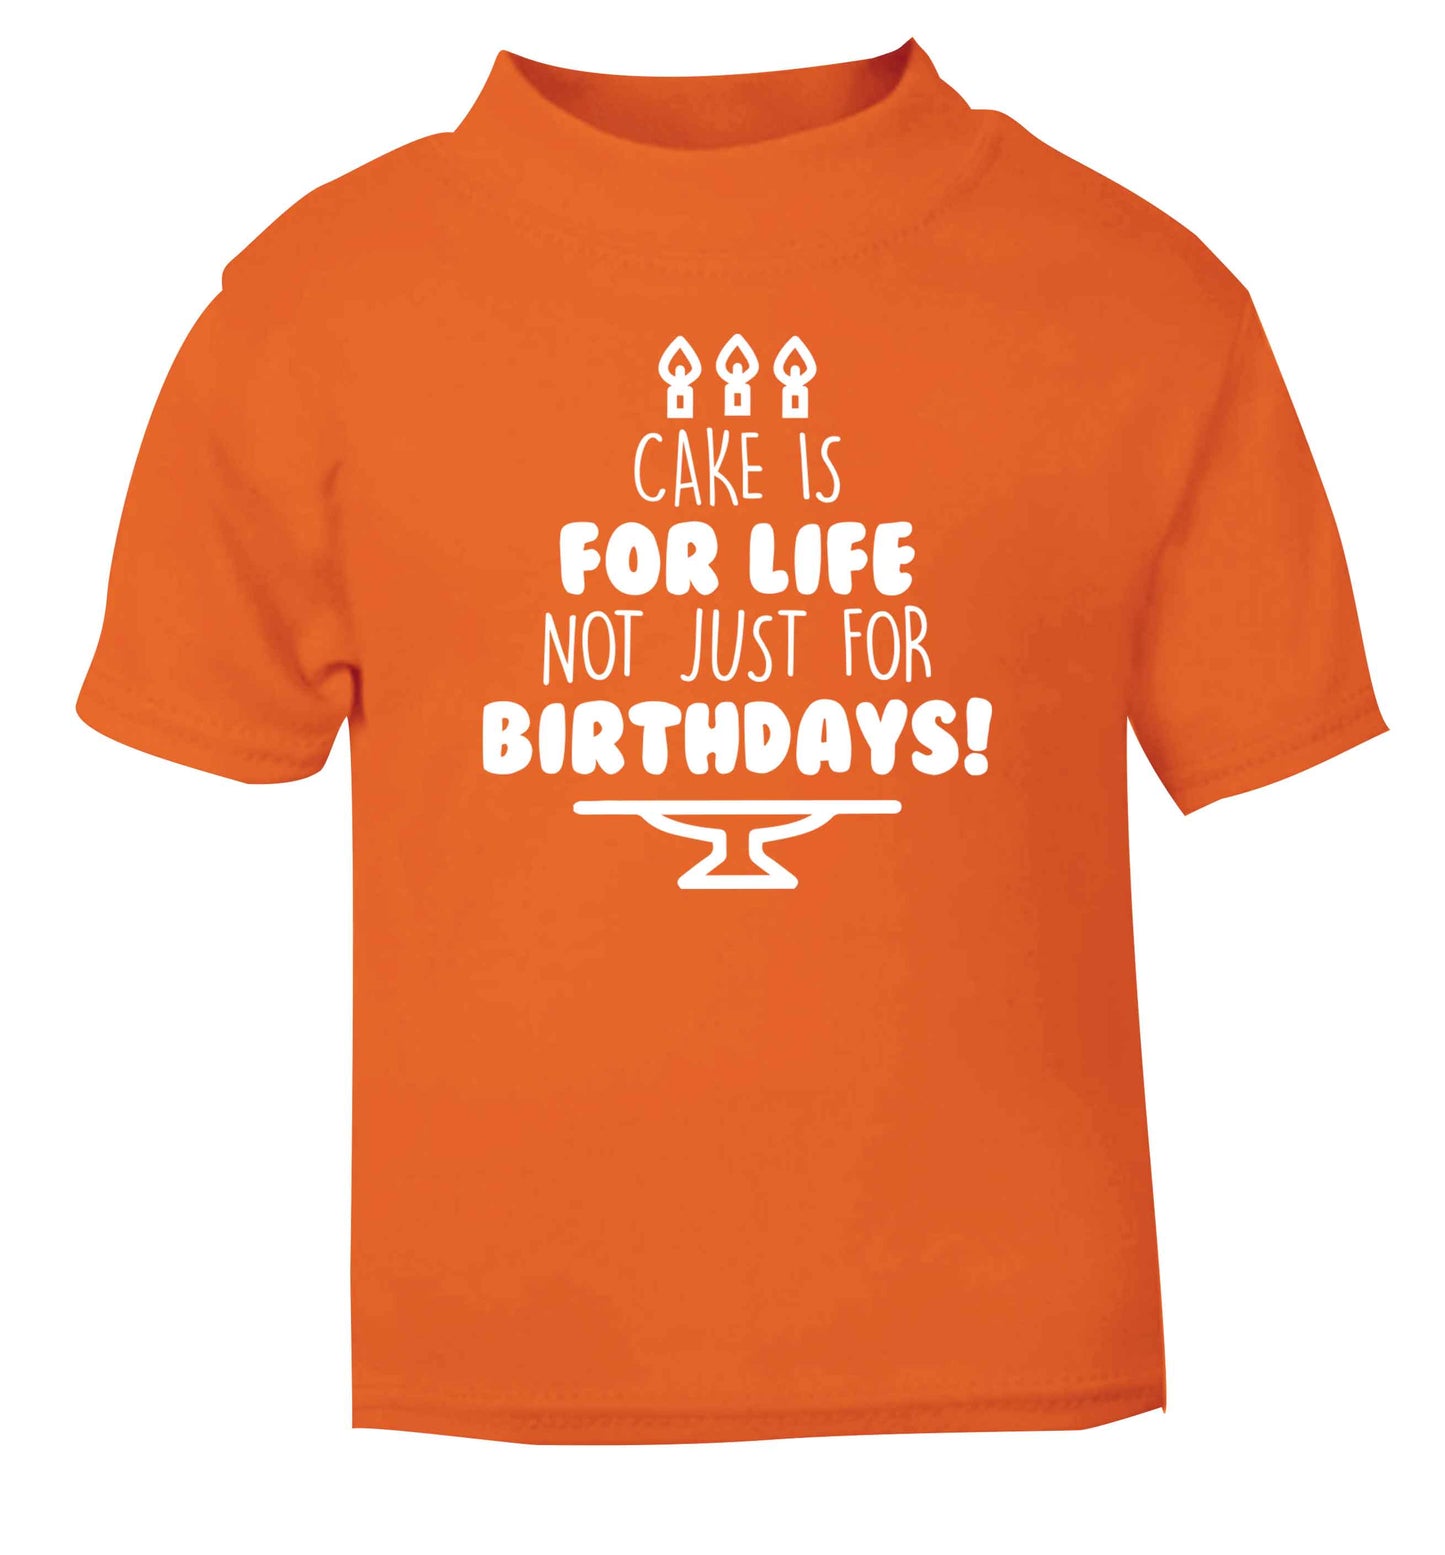 Cake is for life not just for birthdays orange Baby Toddler Tshirt 2 Years